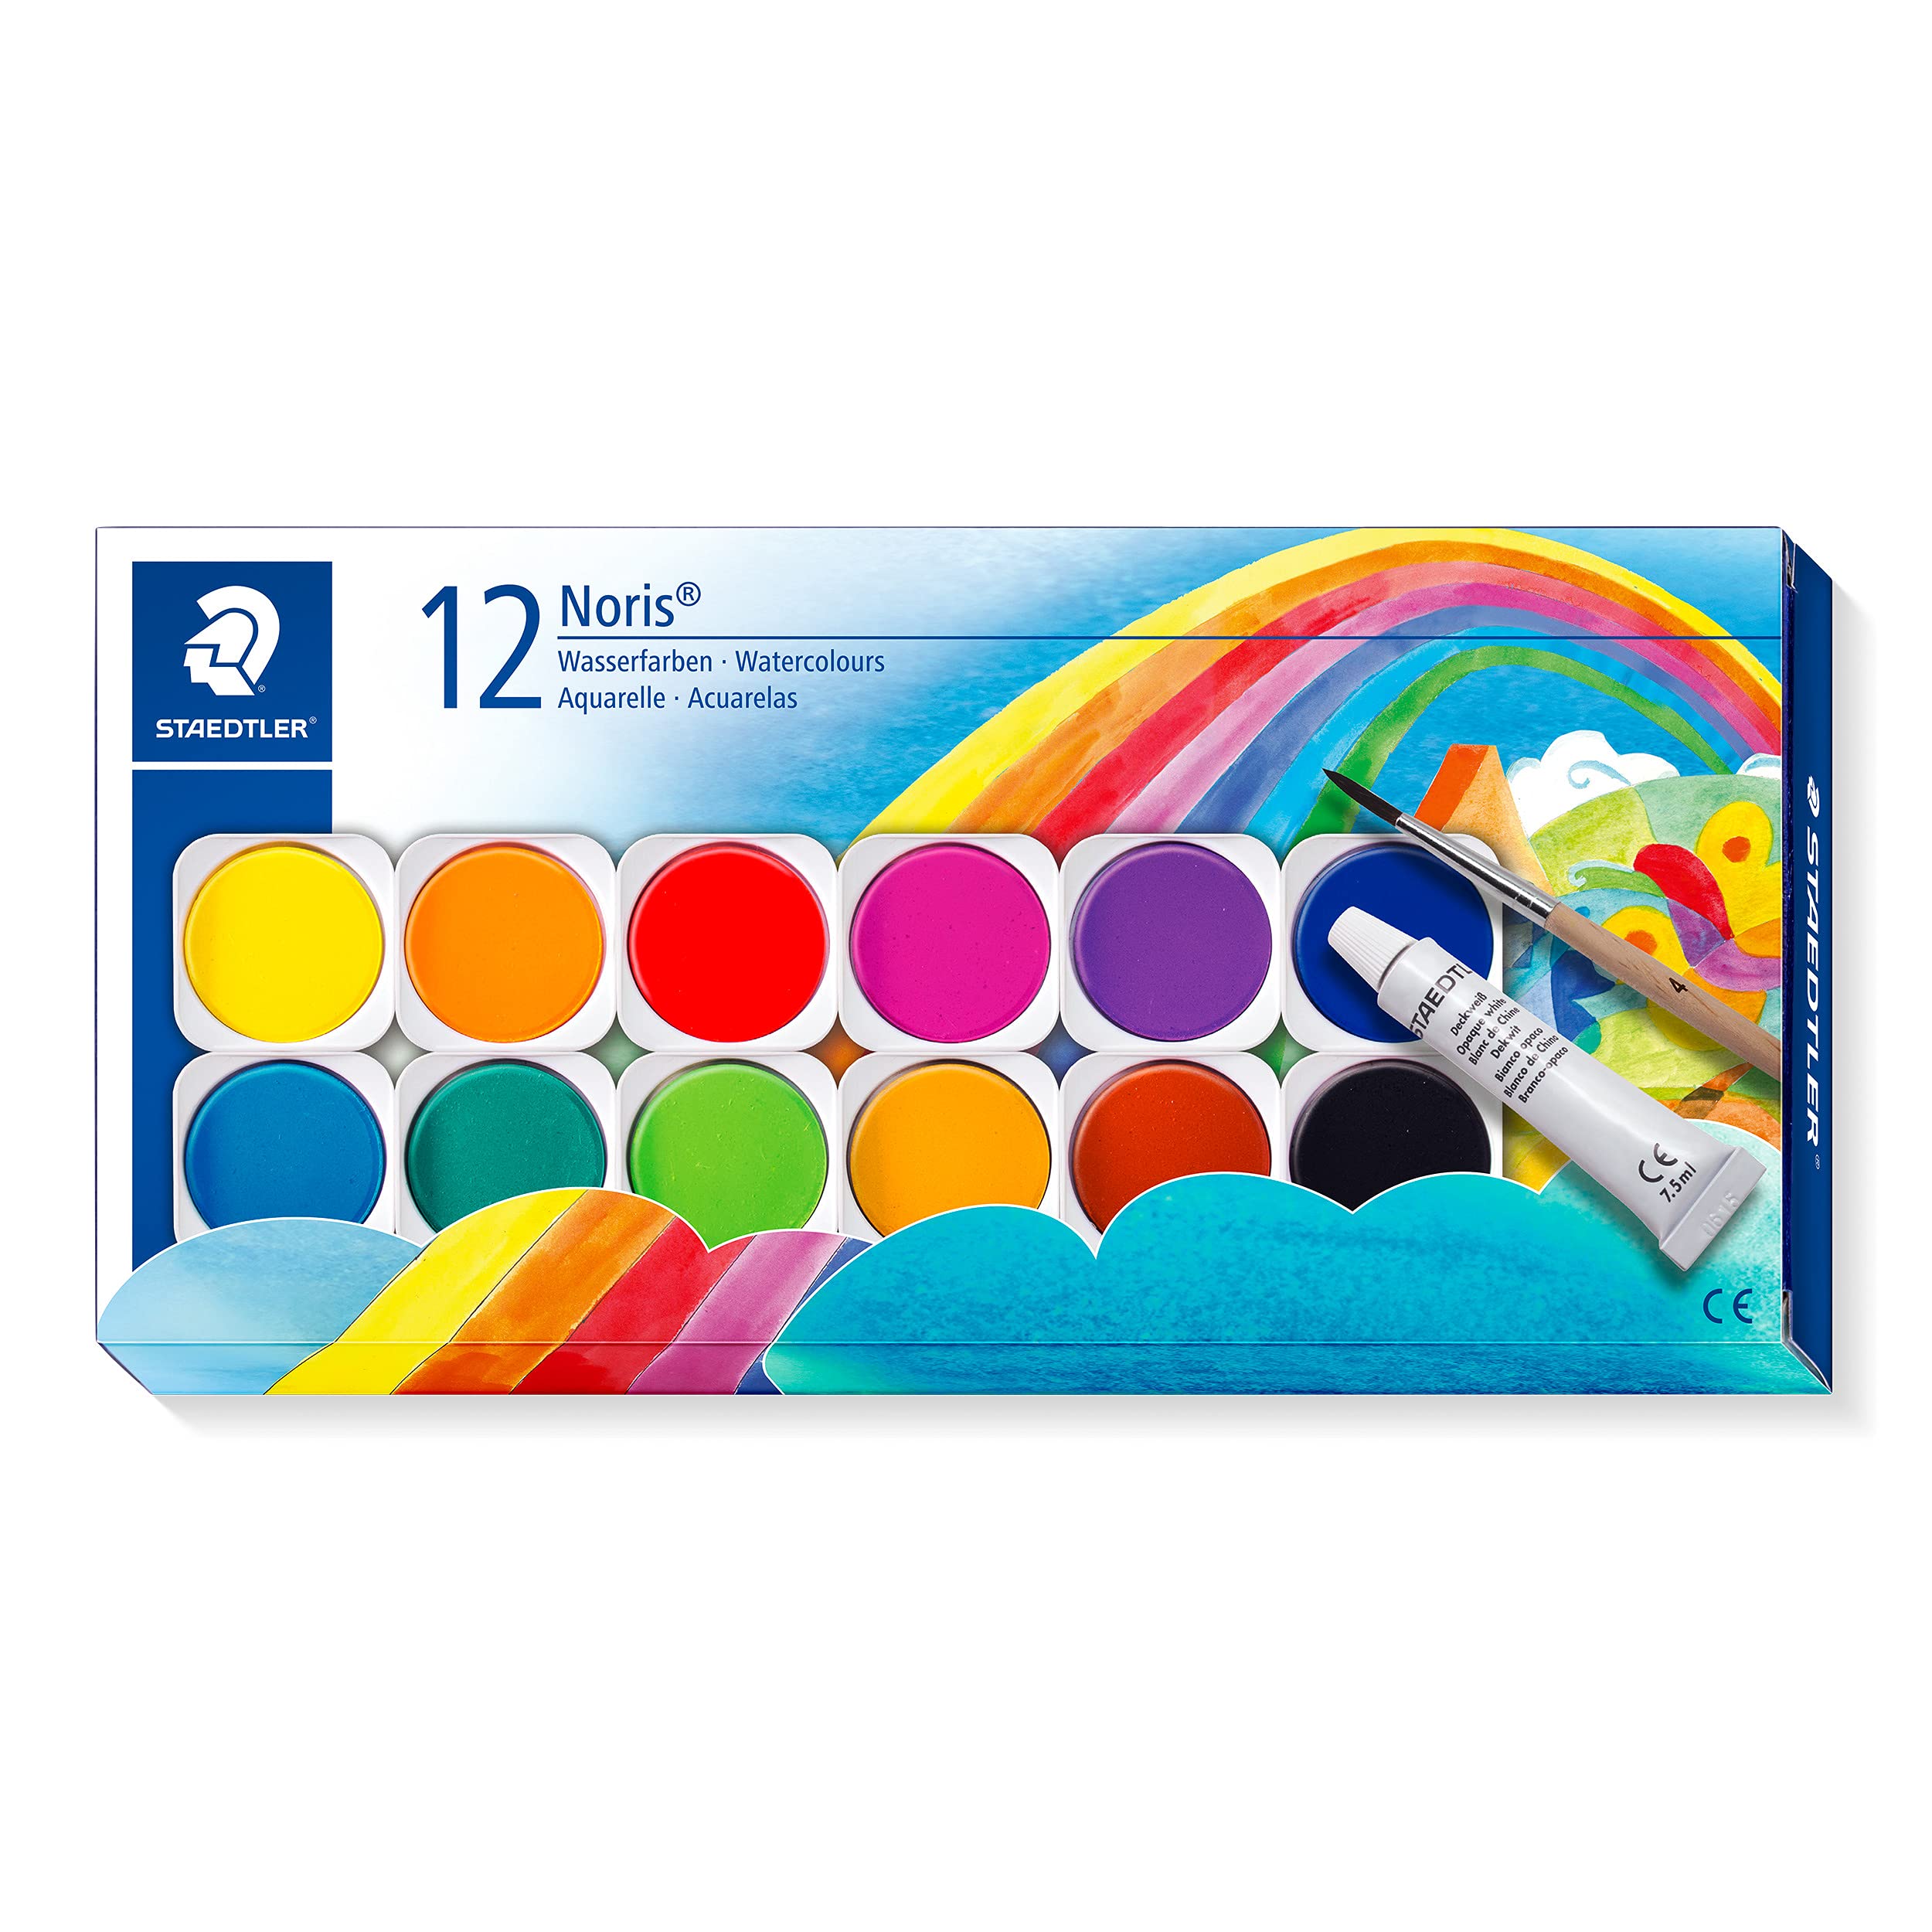 STAEDTLER 888 NC12 Noris Watercolour Paints - 12 Assorted Colours (Pack of 1 with Paint Brush & Opaque Paint)